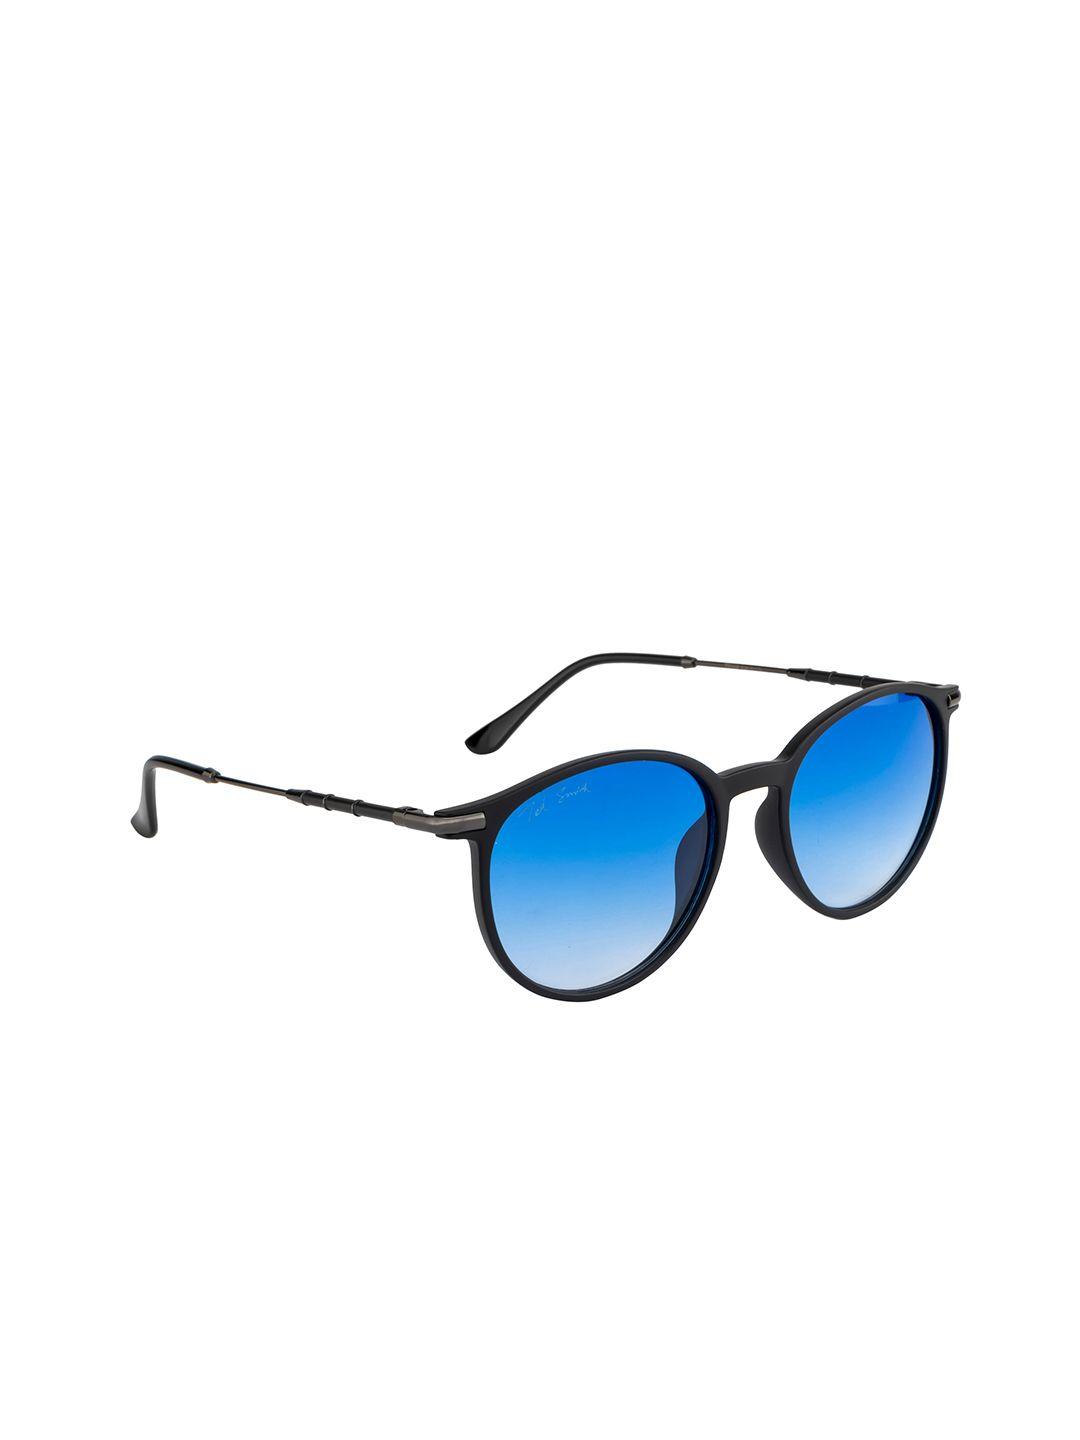 ted smith unisex blue lens & black round sunglasses with uv protected lens xmoon_c2